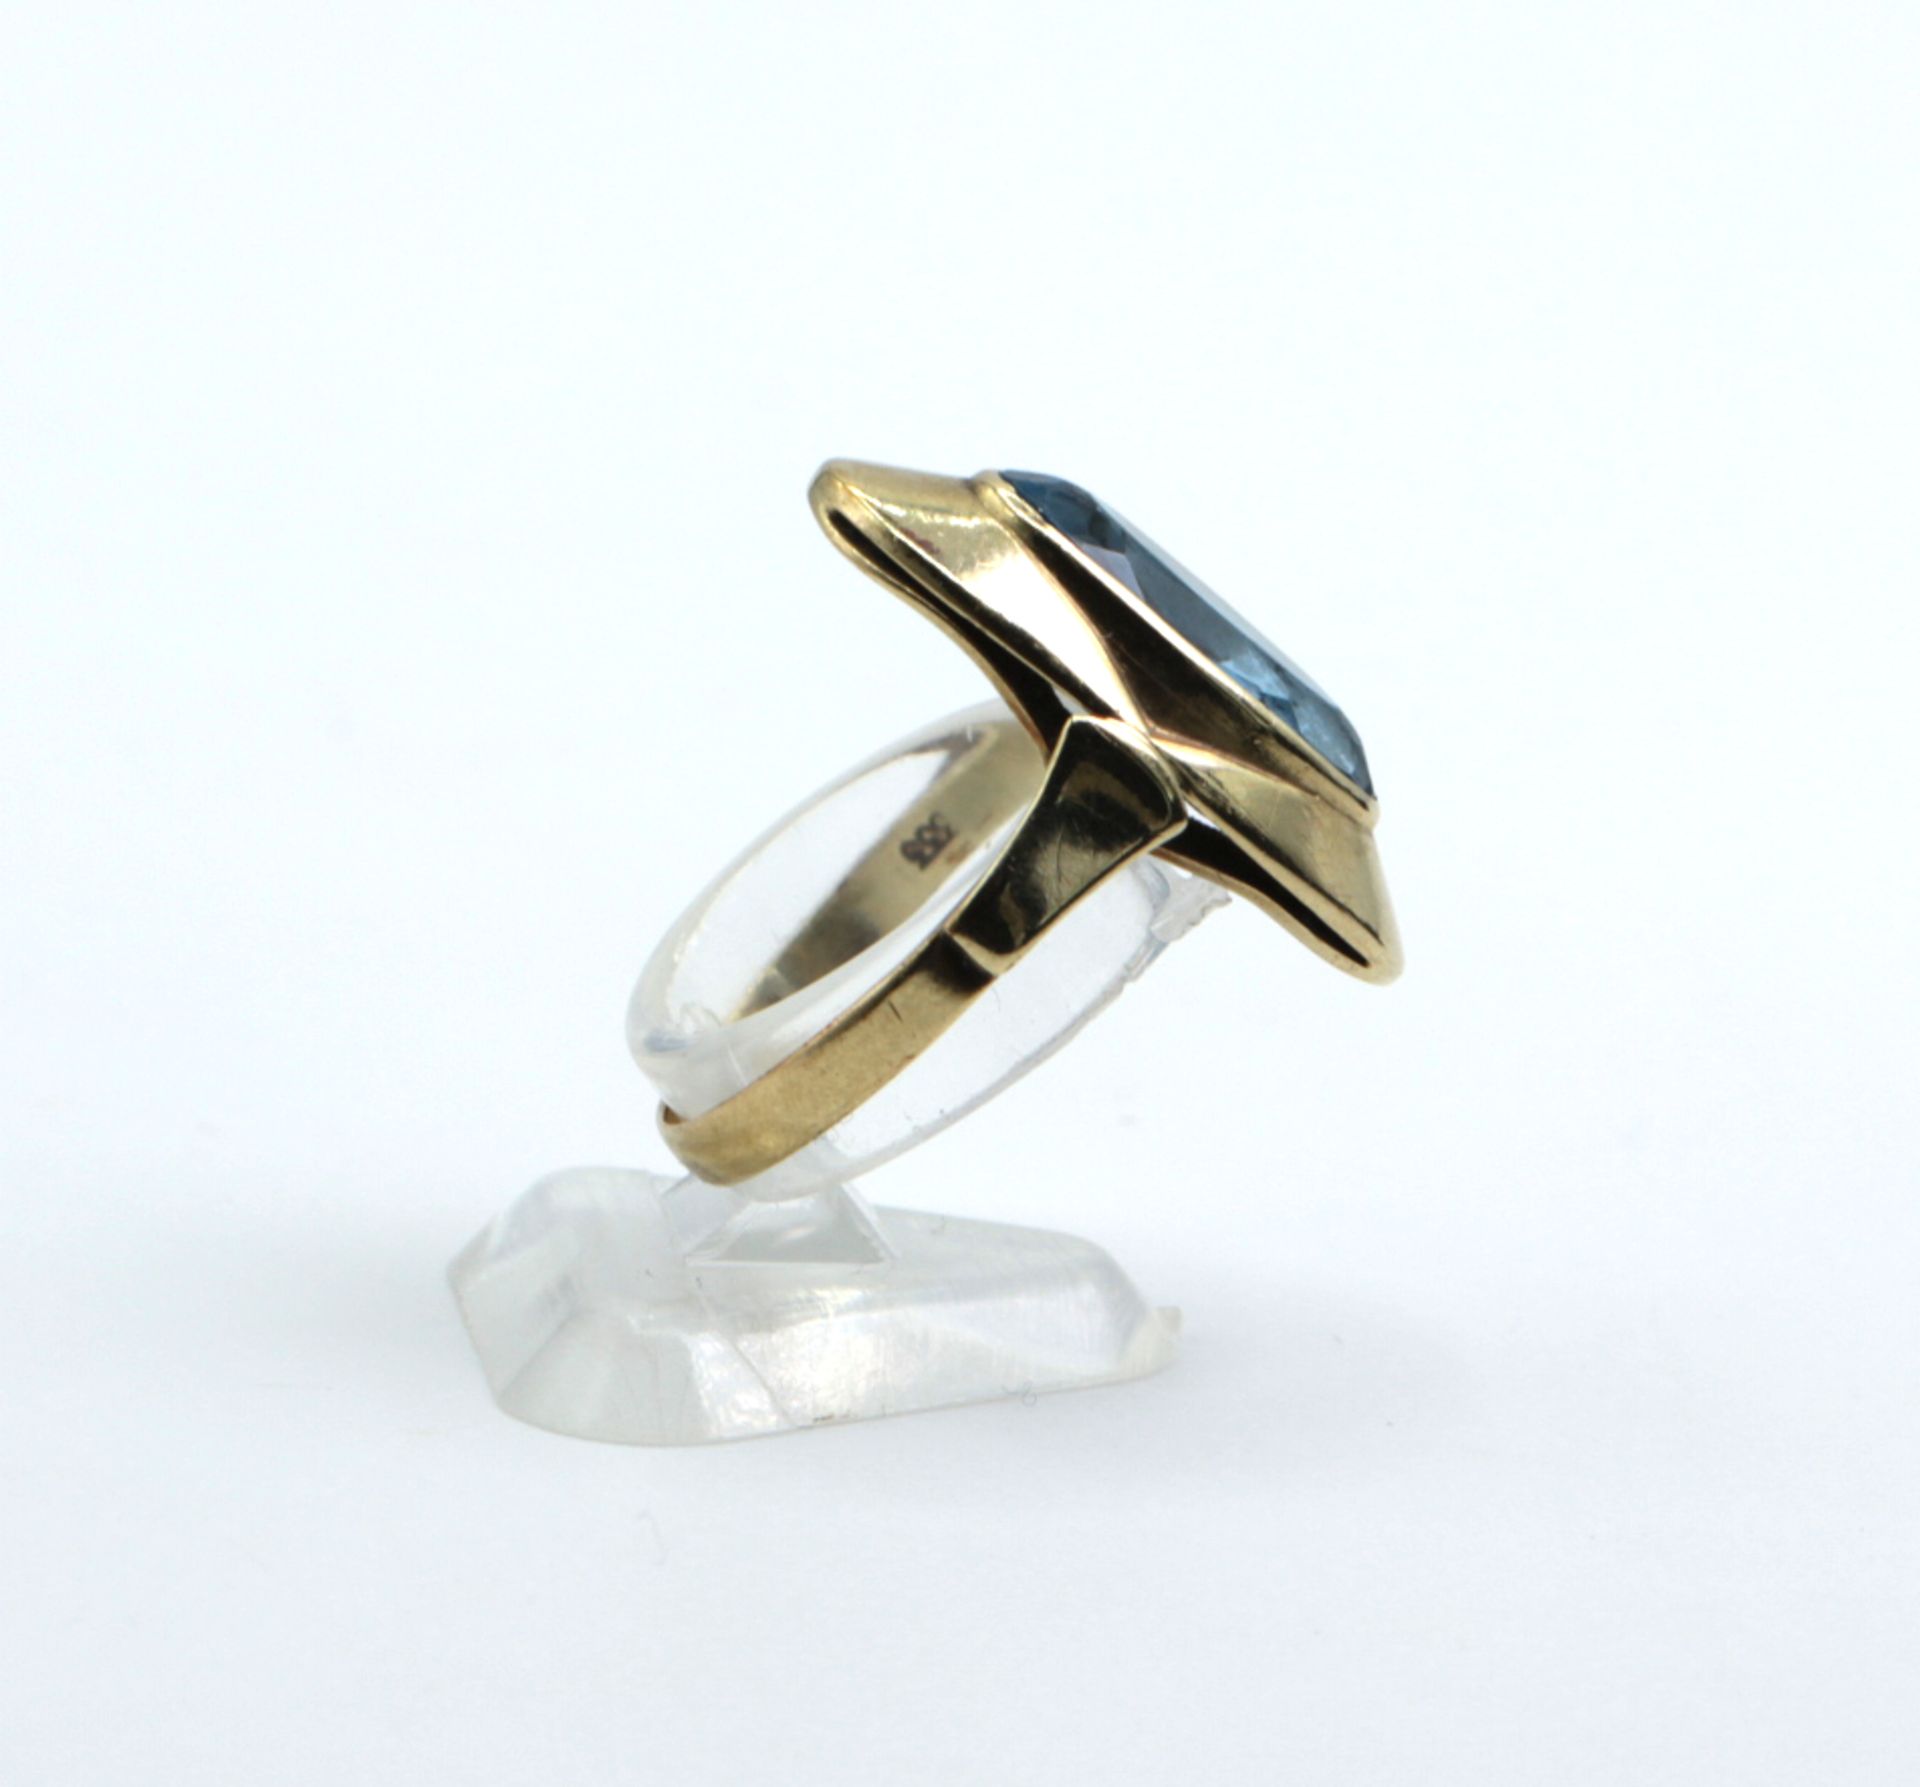 Vintage Ring with blue stone 8K Yellow Gold - Image 2 of 2